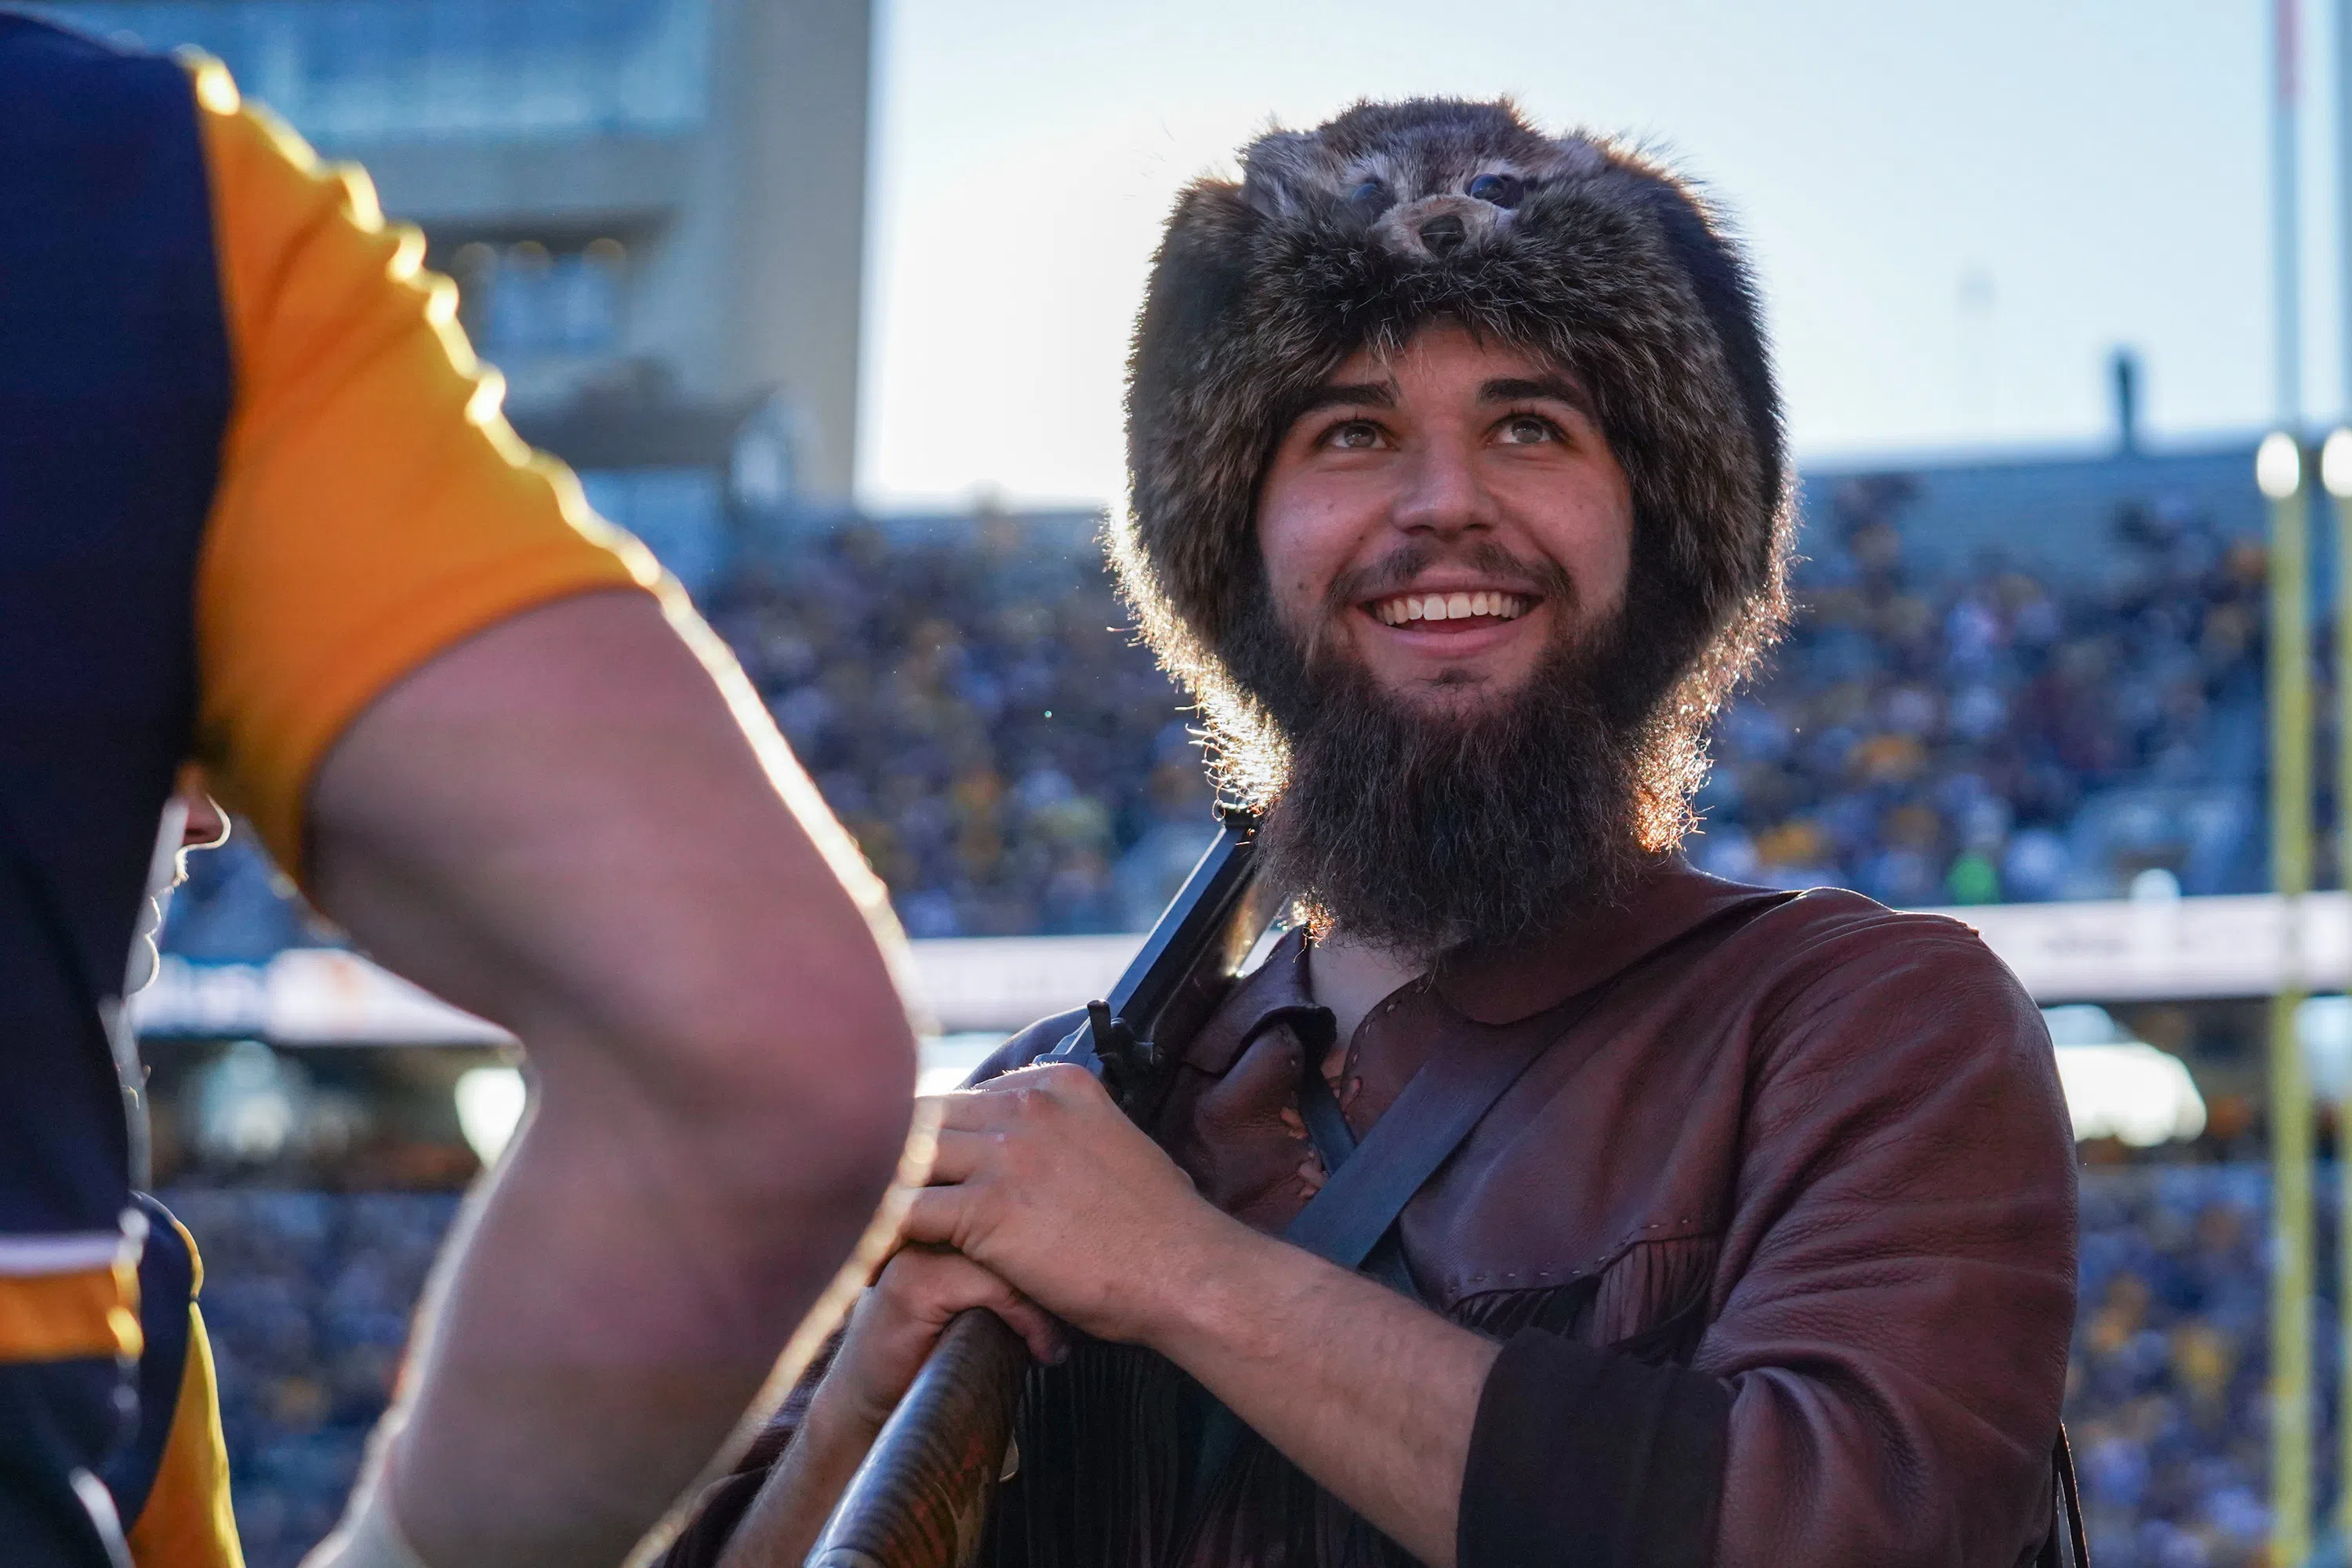 A portrait of the Mountaineer mascot smiling at a football game 